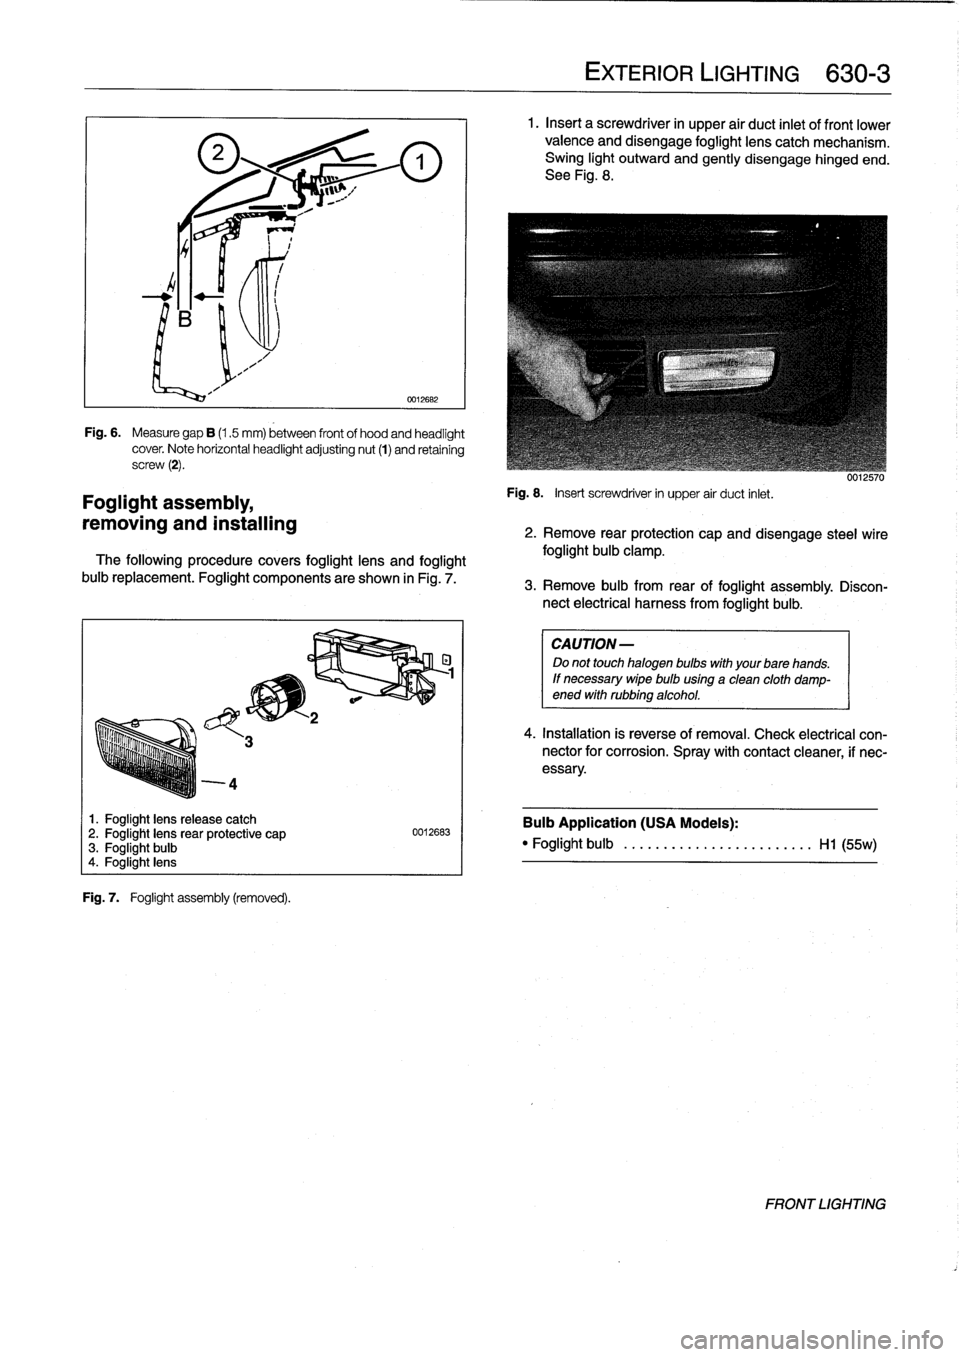 BMW M3 1993 E36 Workshop Manual 4

Foglight
assembly,

removing
and
installing

1
.
Foglight
lens
release
catch
2
.
Foglight
lensrear
protective
cap
3
.
Foglight
bulb
4
.
Foglight
lens

Fig
.
7
.

	

Foglight
assembly
(removed)
.

0